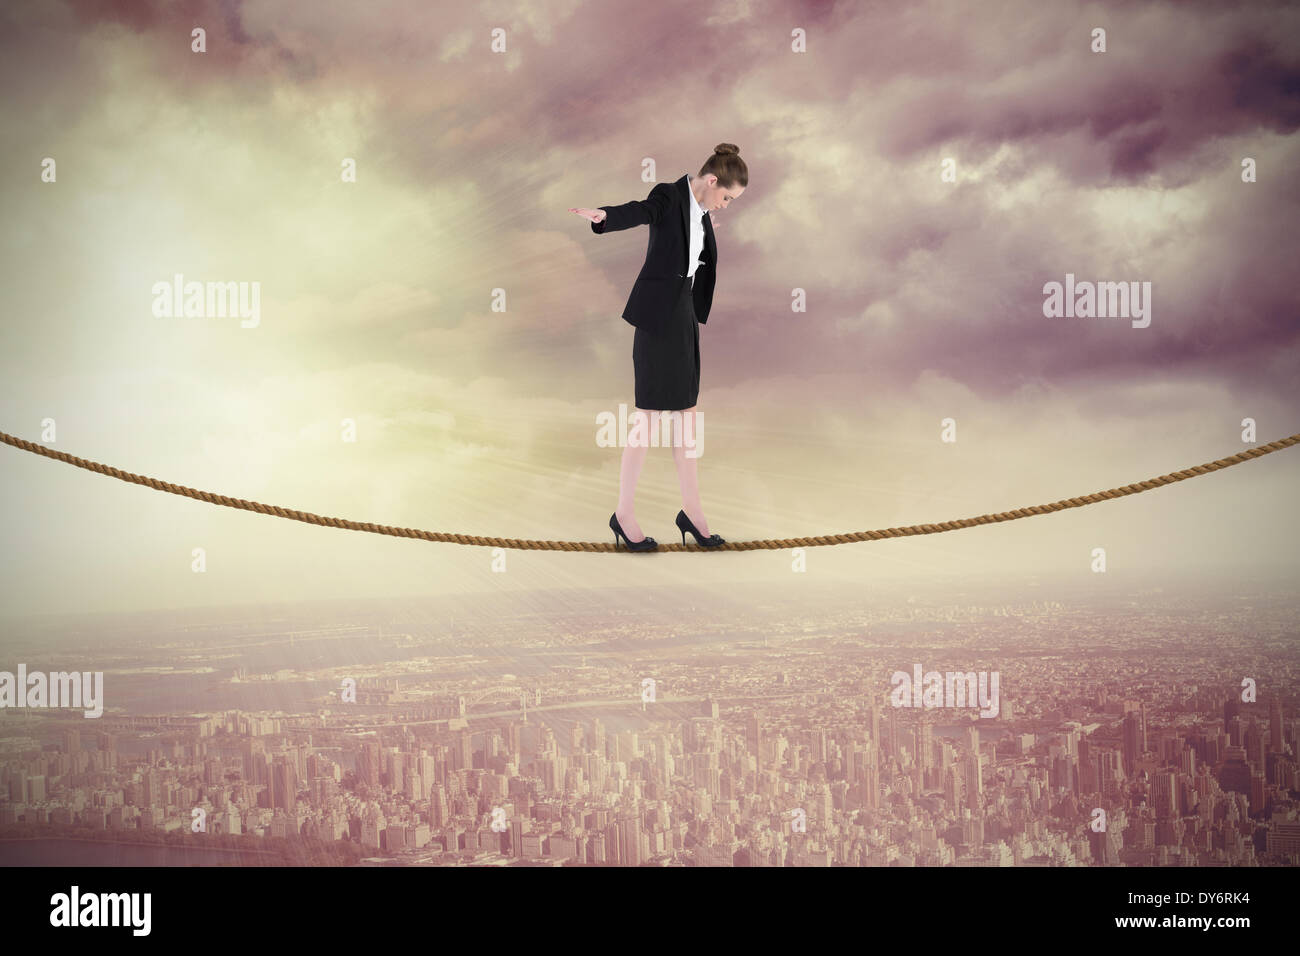 Composite image of businesswoman performing a balancing act Stock Photo